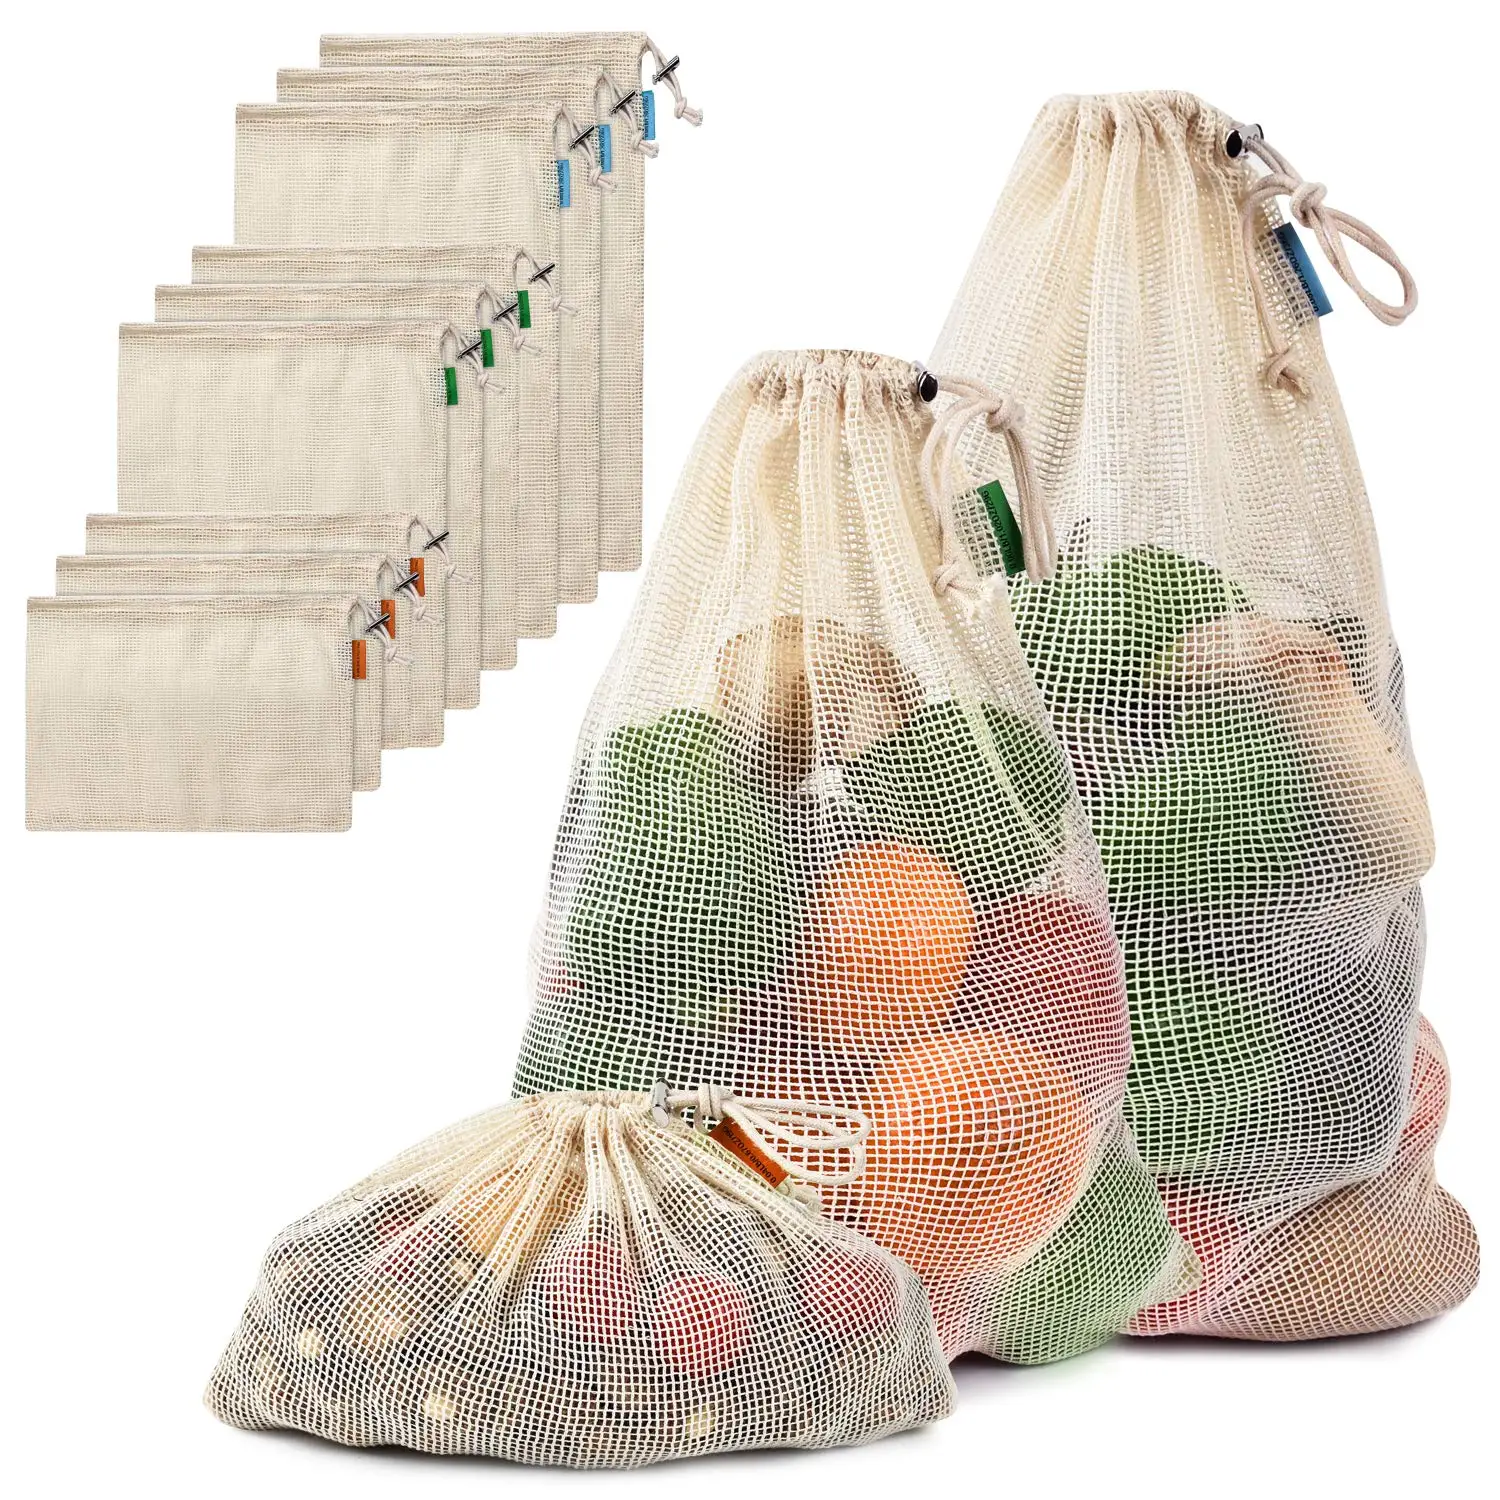 Biodegradable produce bags from 100 cotton recycled reusable mesh produced cotton bag